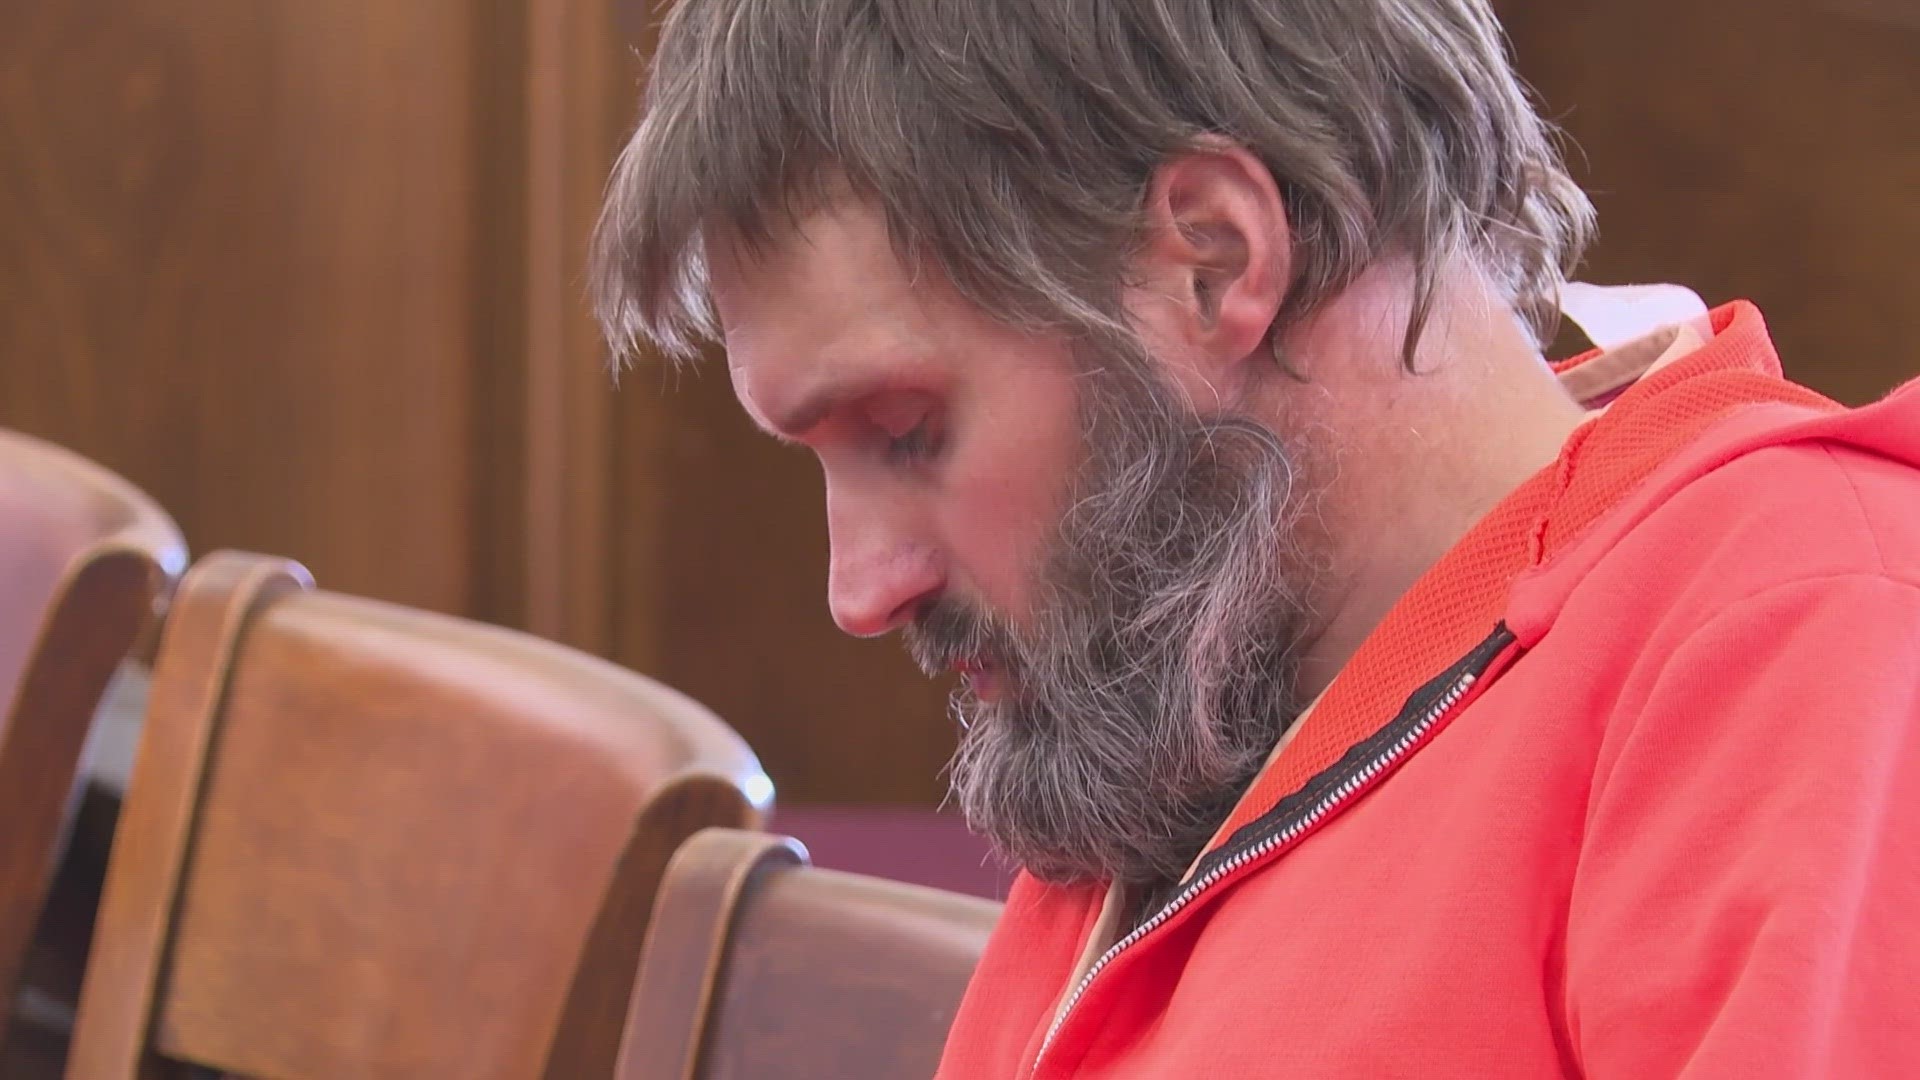 Frederick Reer pleaded not guilty with pretrial set for March 11. The case dates back more than six years after Dean went missing in July of 2017.